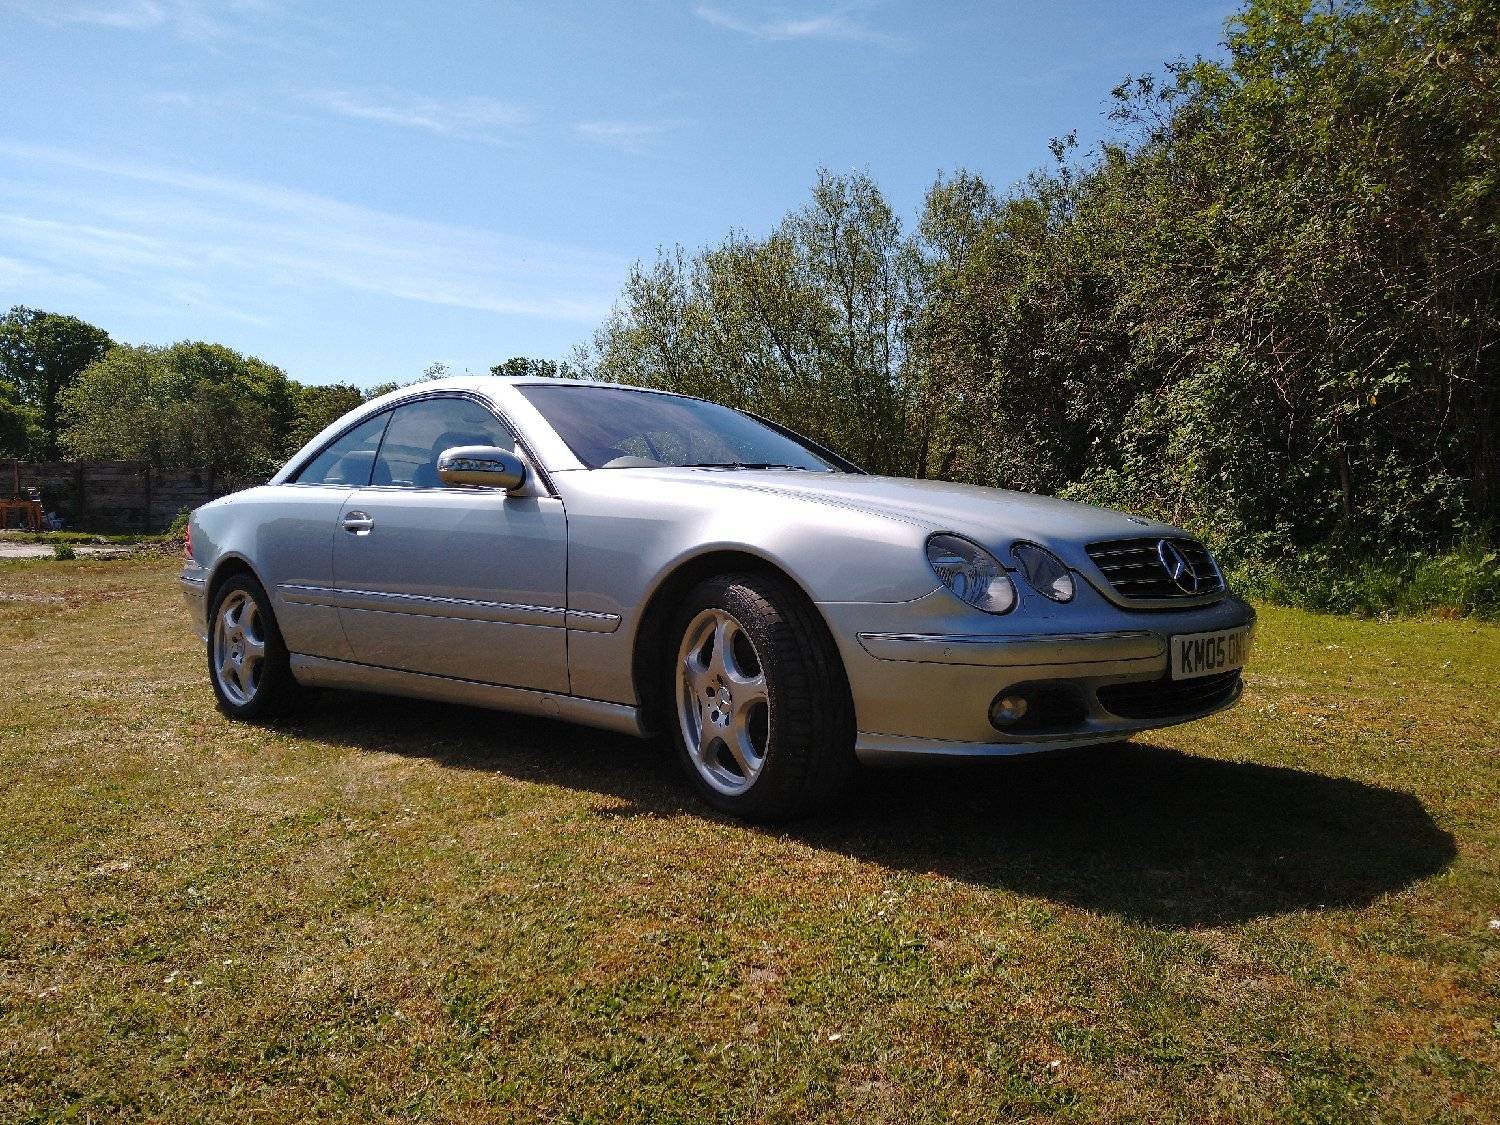 For Sale Mercedes Benz Cl 500 05 Offered For Gbp 6 475